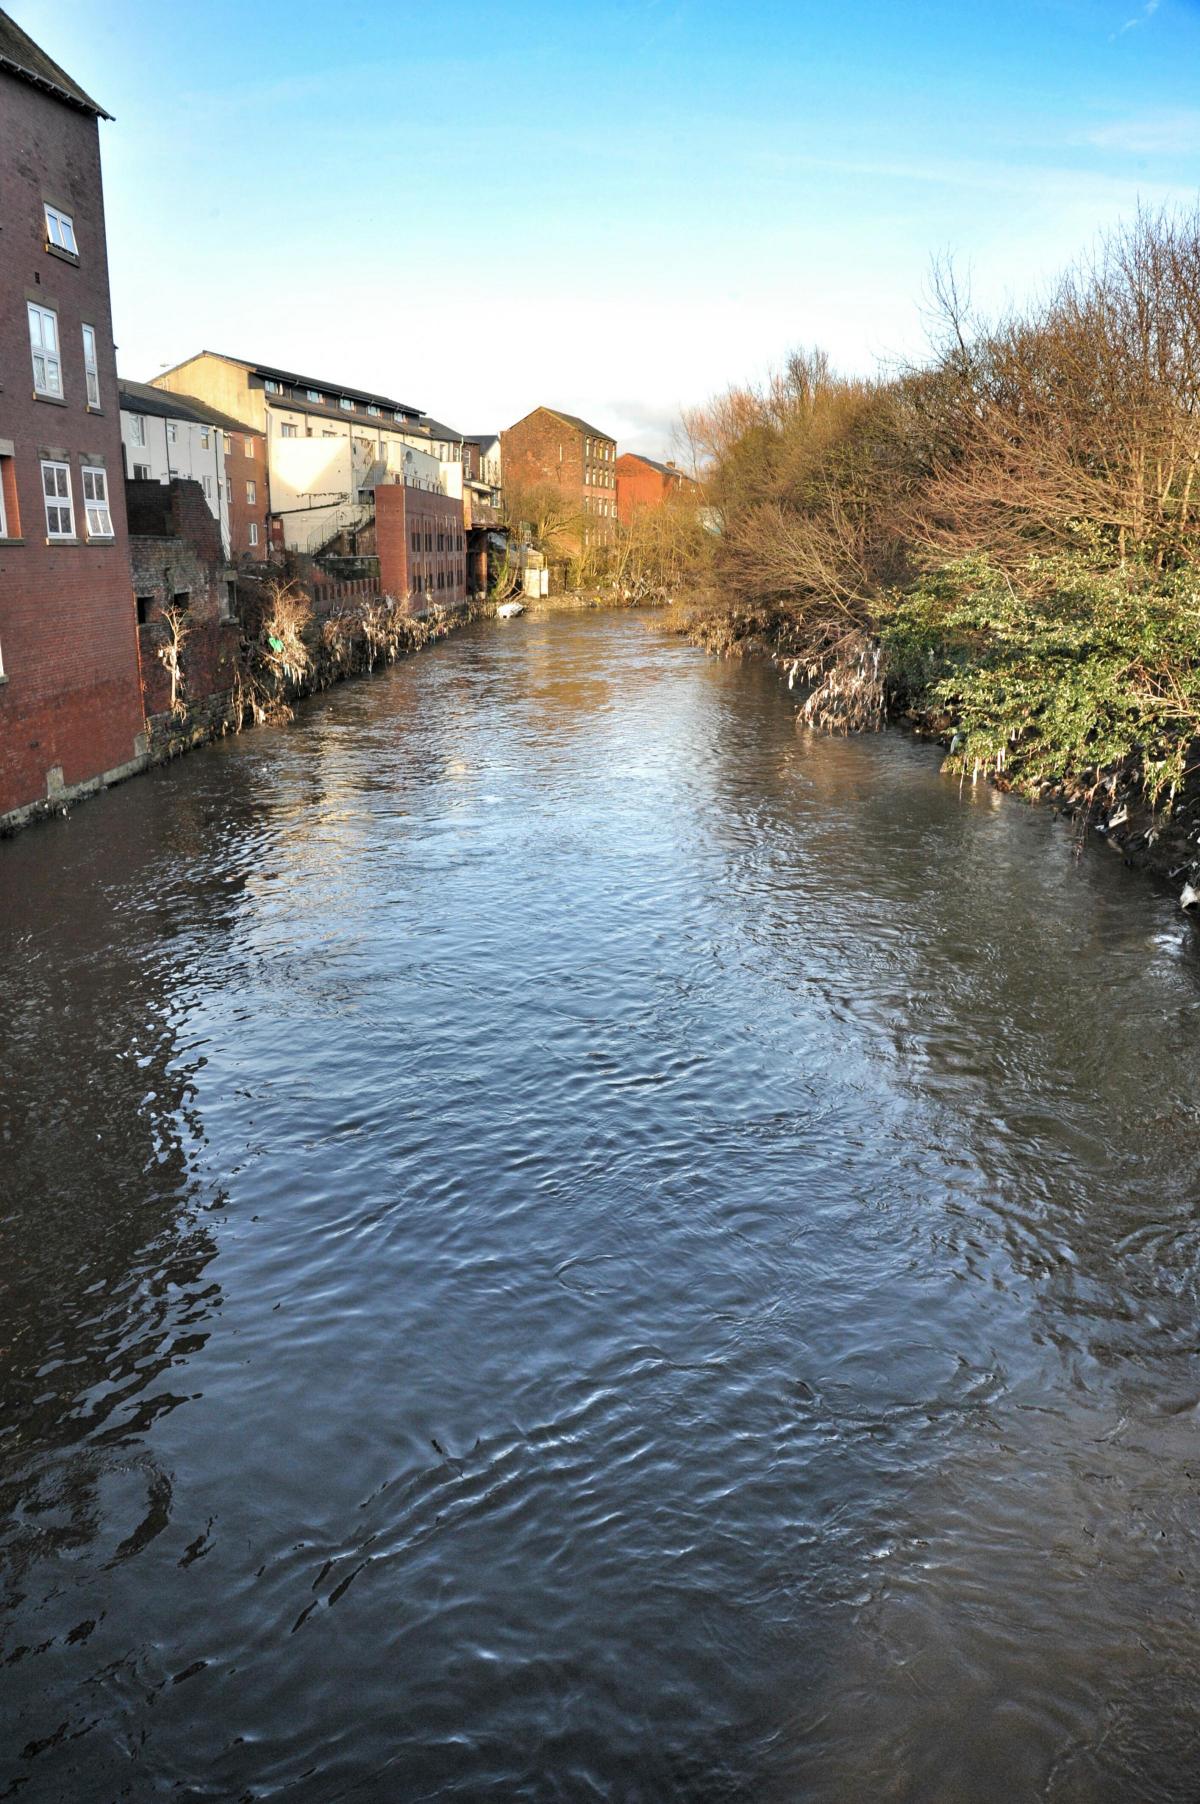 The river all quiet the day after flooding in Radcliffe